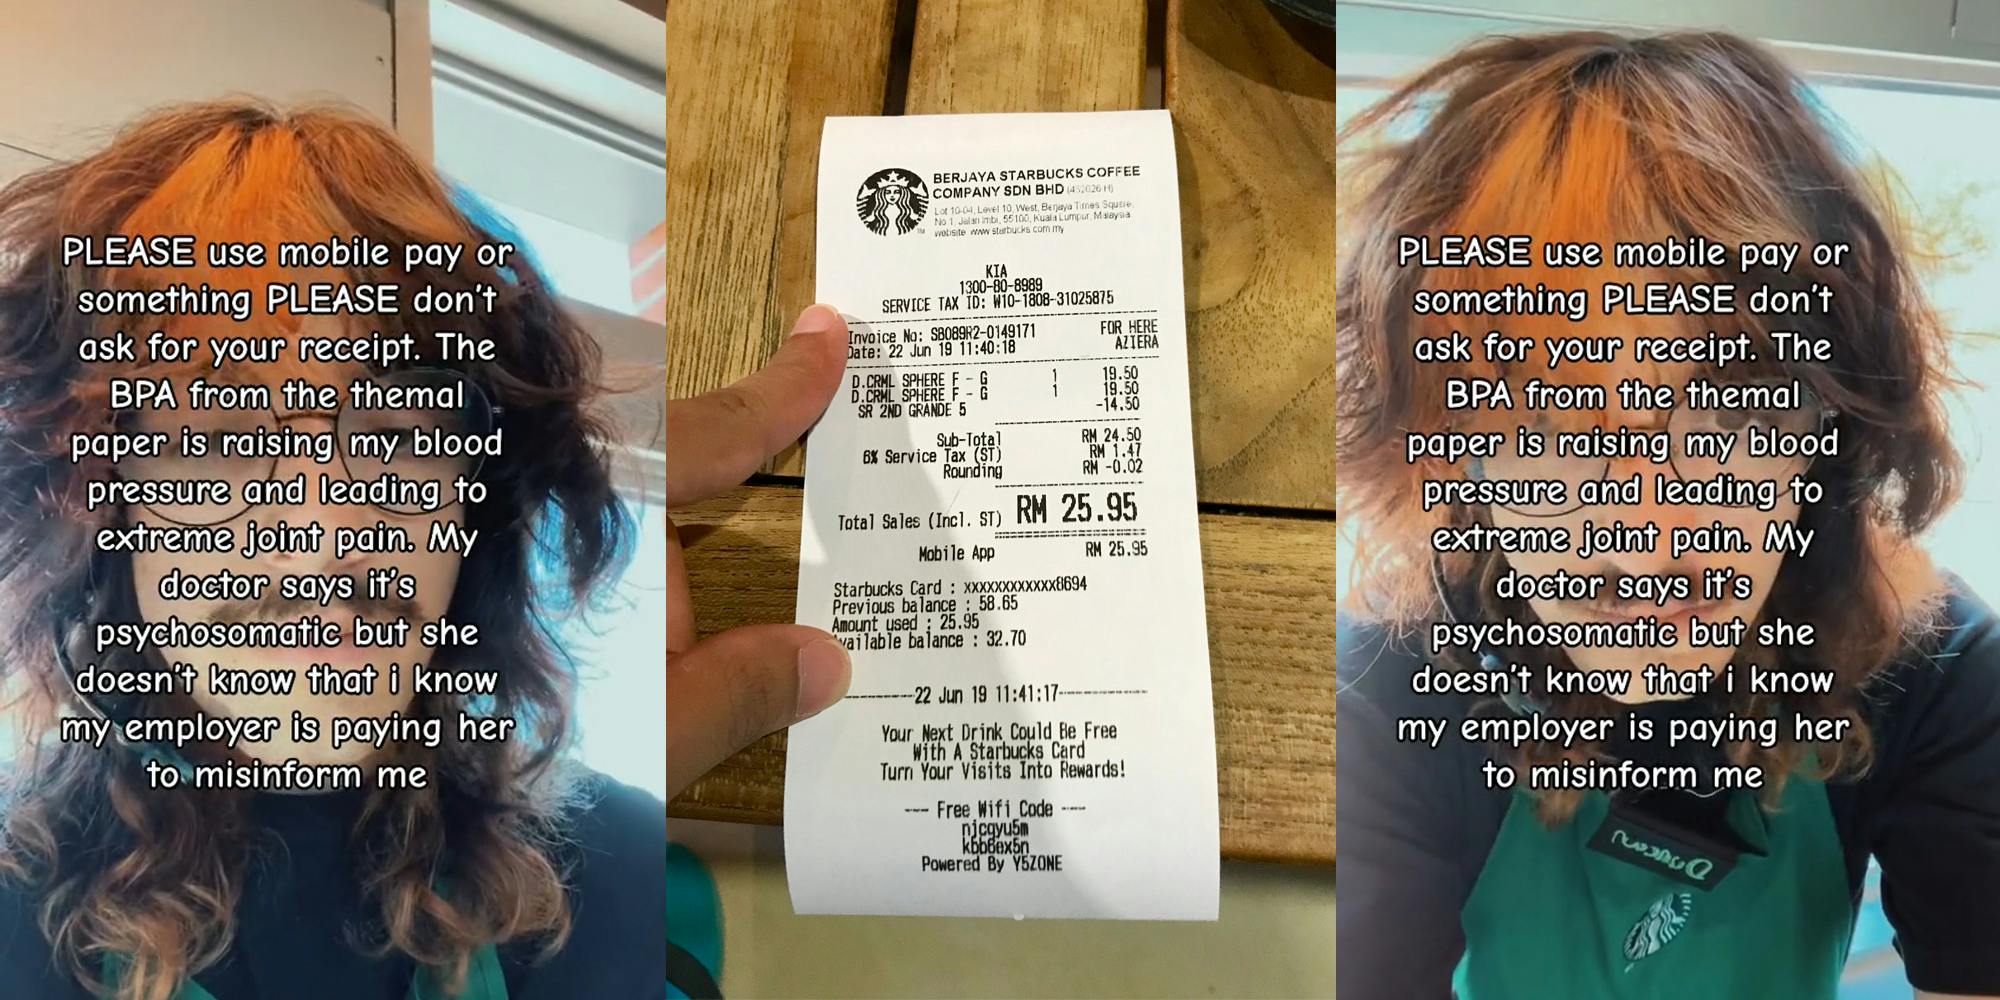 Starbucks barista with caption "PLEASE use mobile pay or something PLEASE don't ask for your receipt. The BPA from the thermal paper is raising my blood pressure and leading to extreme joint pain. My doctor says it's psychosomatic but she doesn't know that I know my employer is paying her to misinform me" (l) Starbucks receipt on wooden table (c) Starbucks barista with caption "PLEASE use mobile pay or something PLEASE don't ask for your receipt. The BPA from the thermal paper is raising my blood pressure and leading to extreme joint pain. My doctor says it's psychosomatic but she doesn't know that I know my employer is paying her to misinform me" (r)